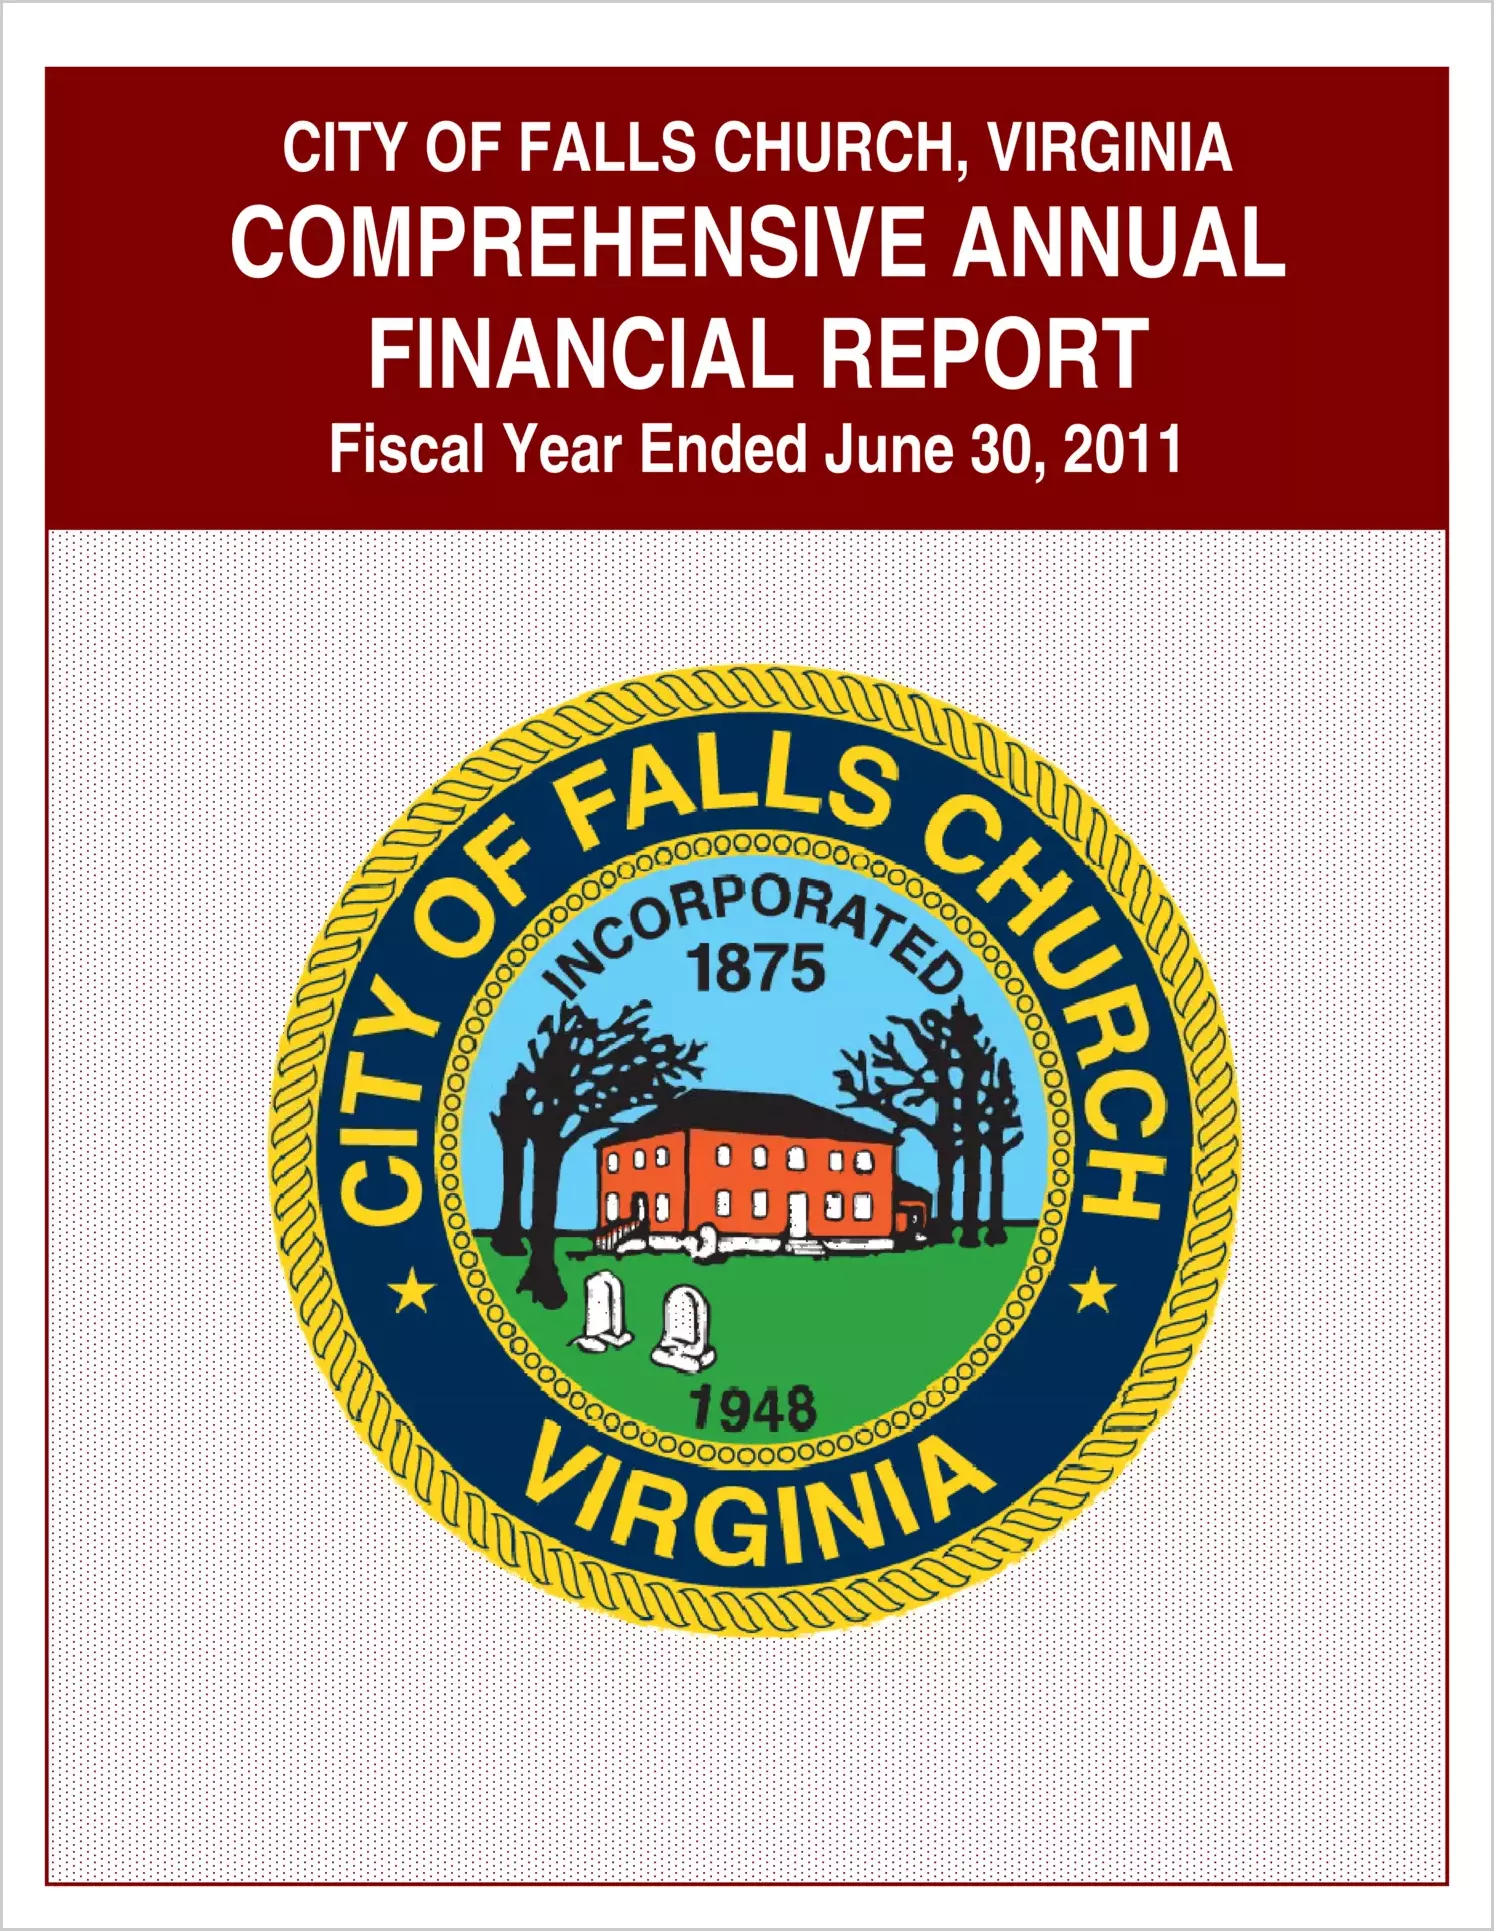 2011 Annual Financial Report for City of Falls Church